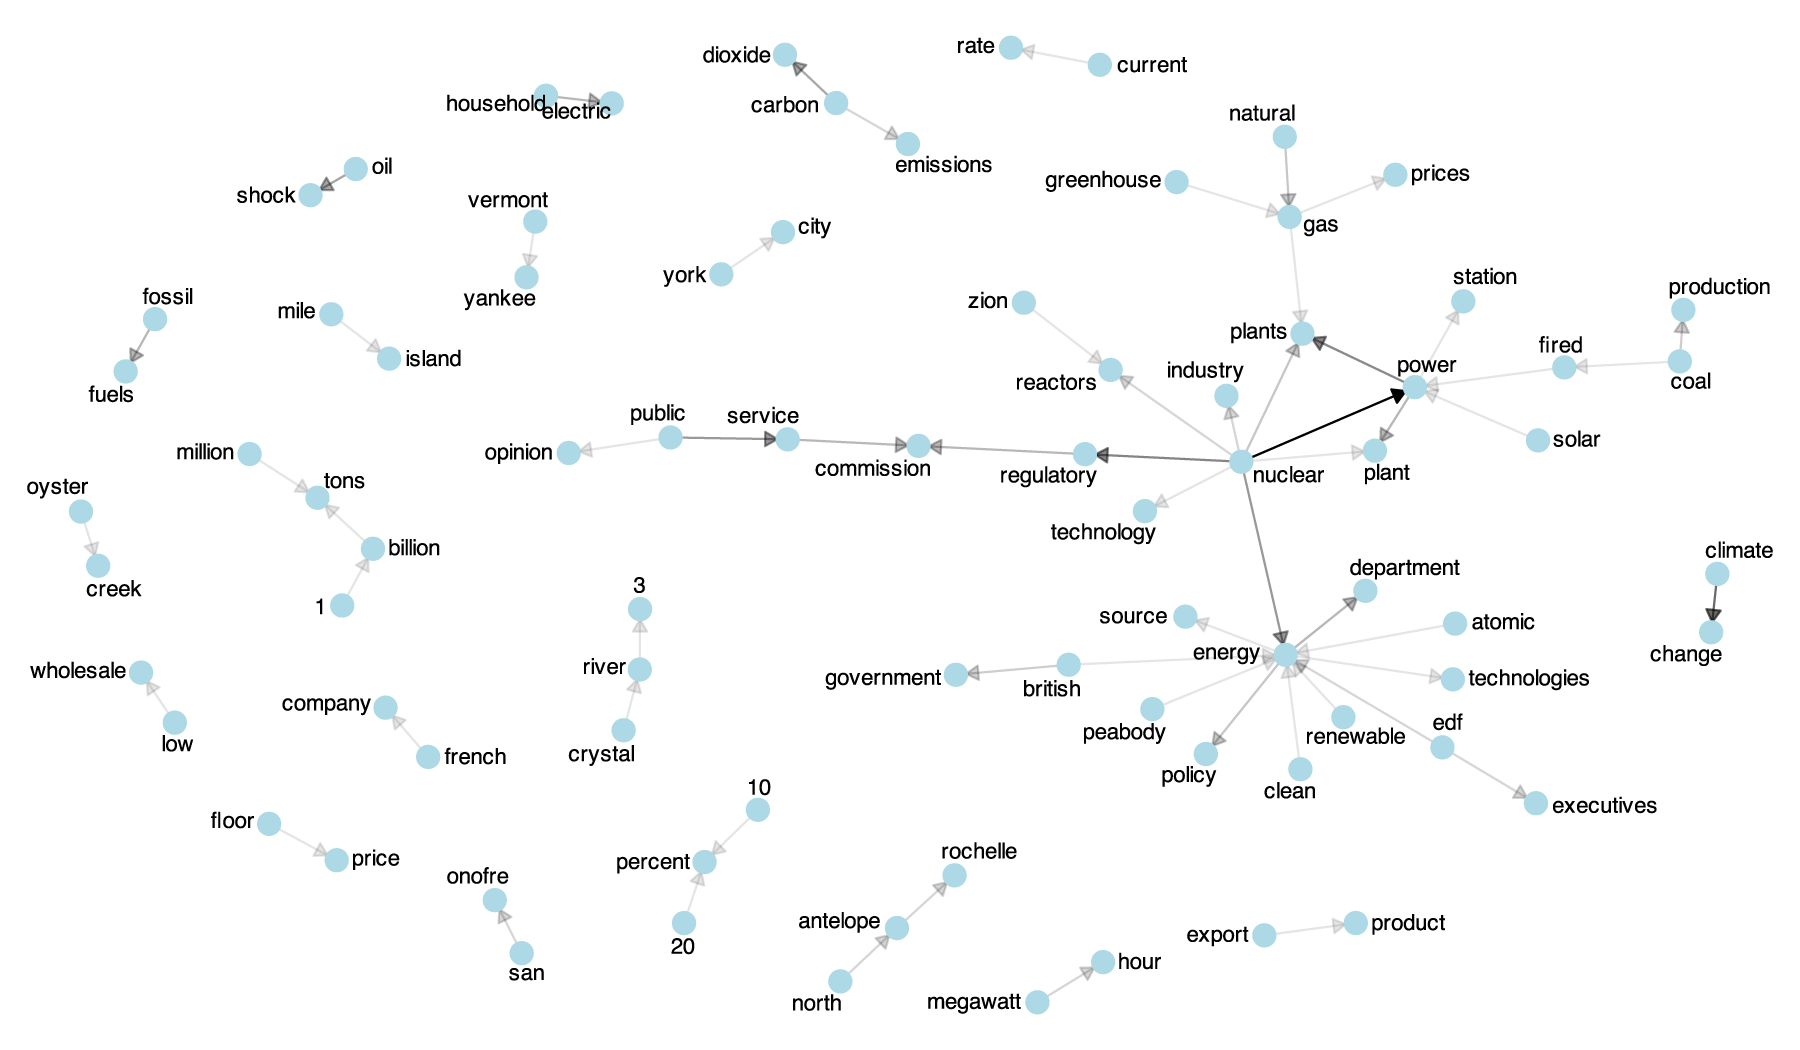 Network map of topics discussed in the news media in 2013